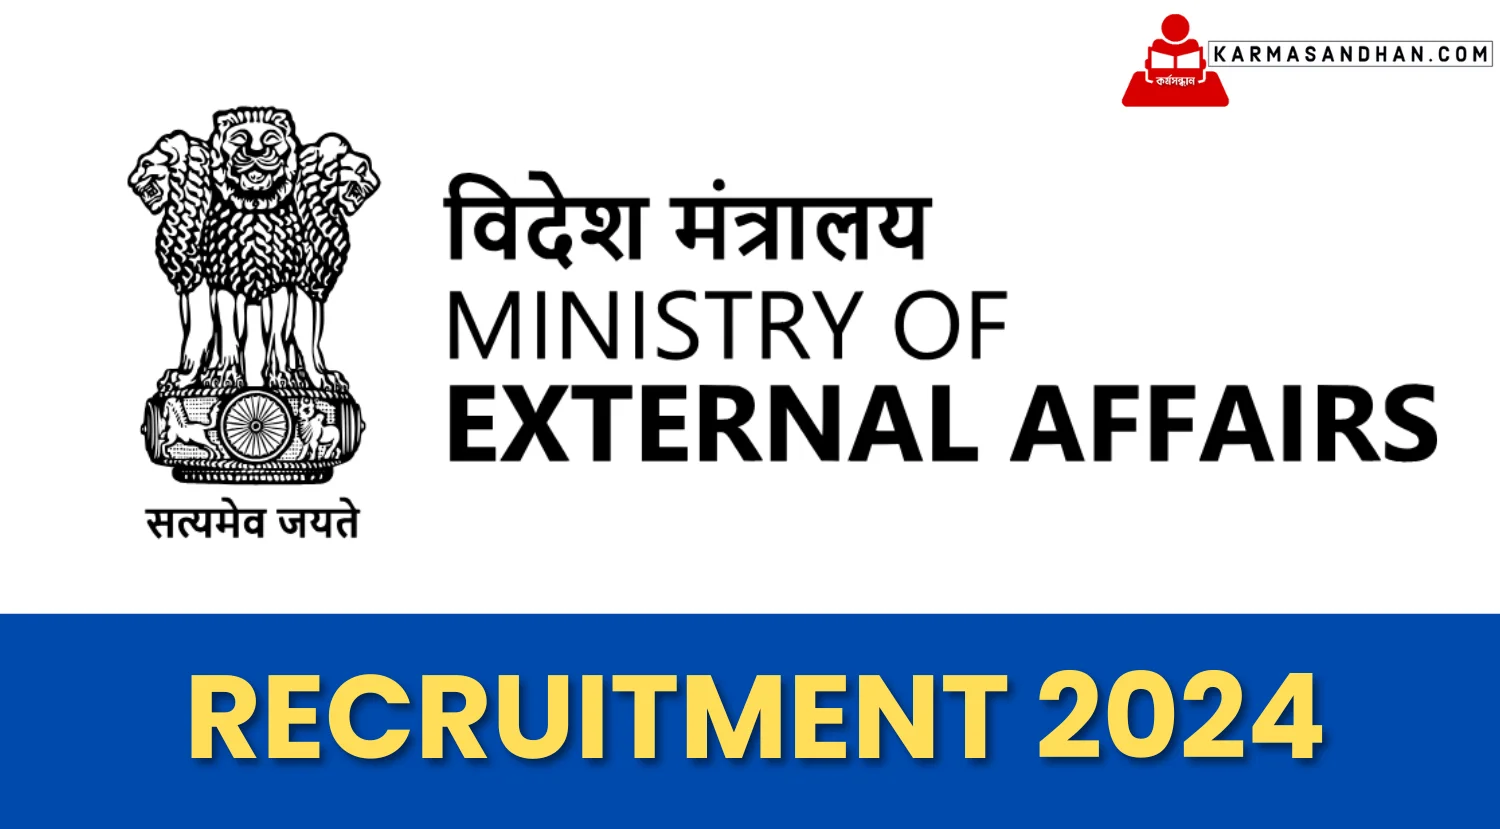 Ministry of External Affairs Assistant Secretary-General Recruitment 2024